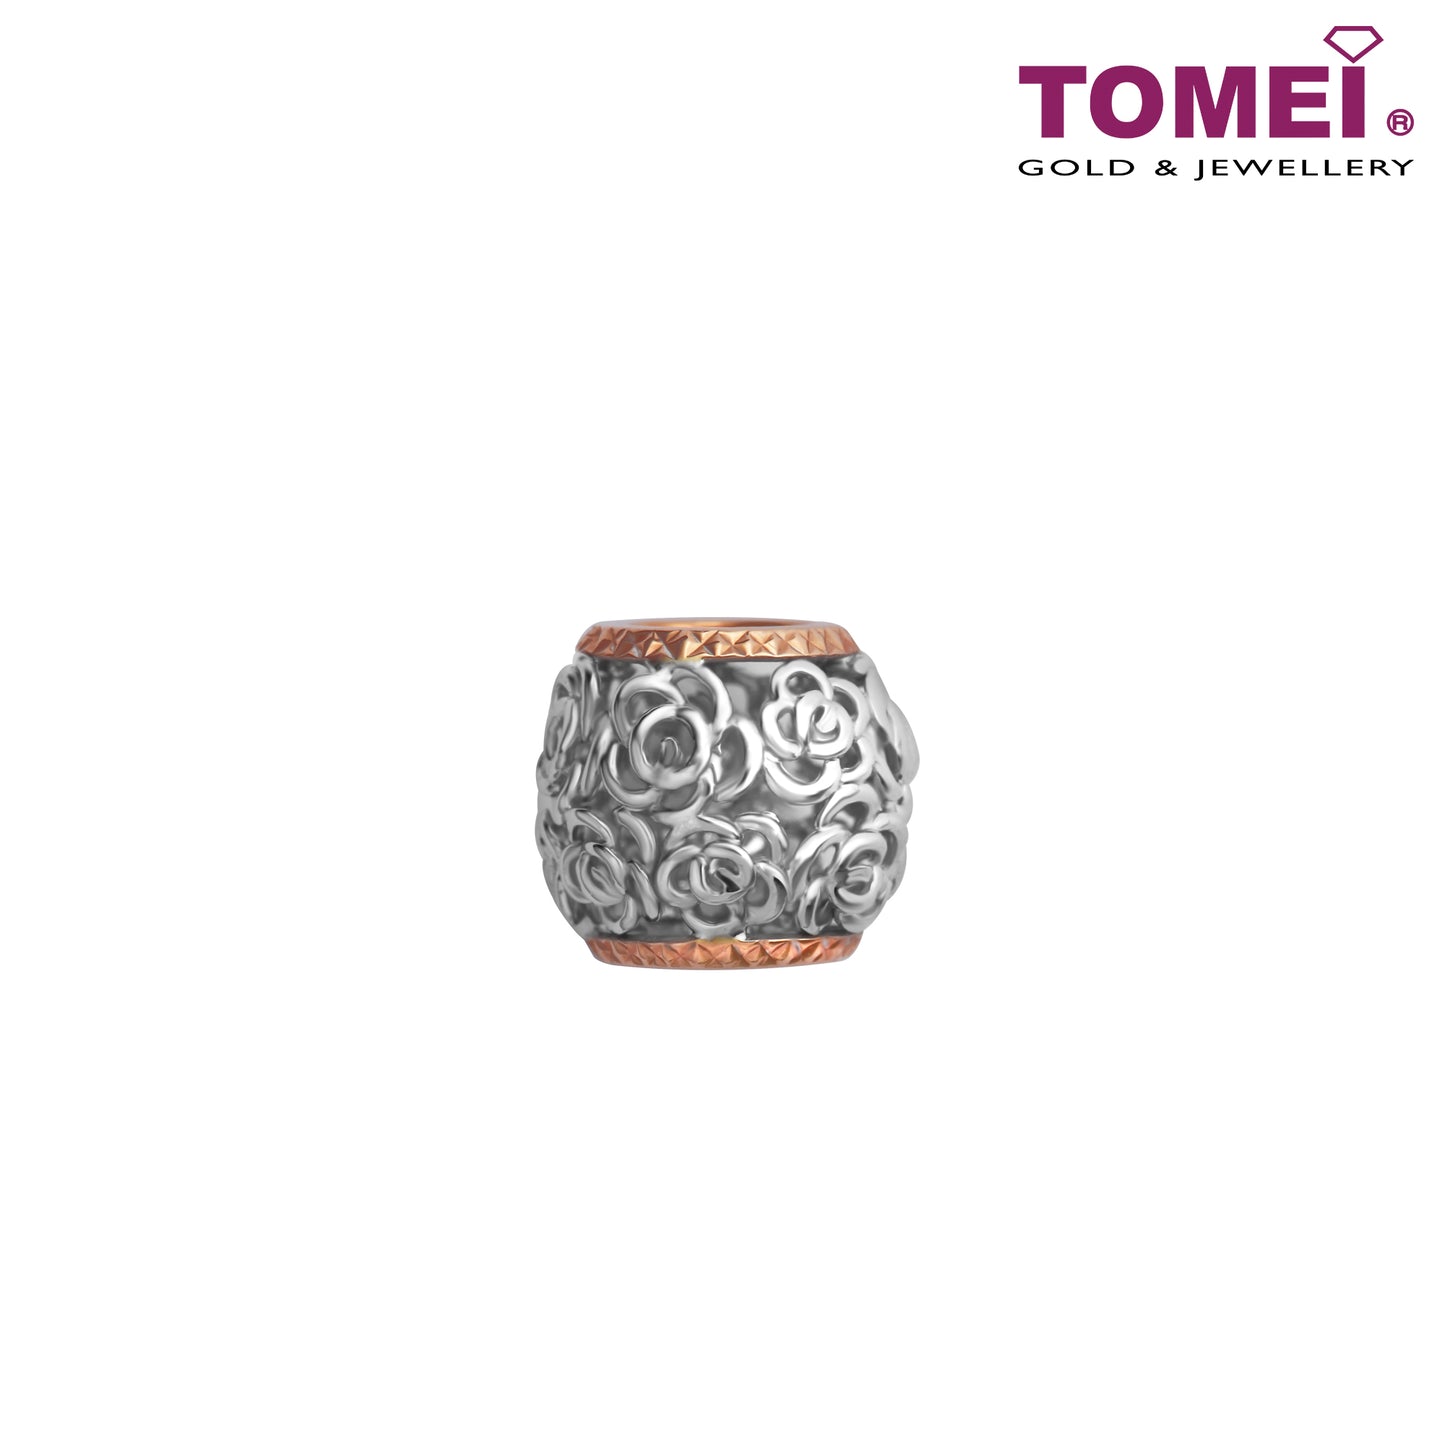 Charm of Crocheted Roses in Intertwined Opulence | Tomei White Gold 585 (14K) (P6119)